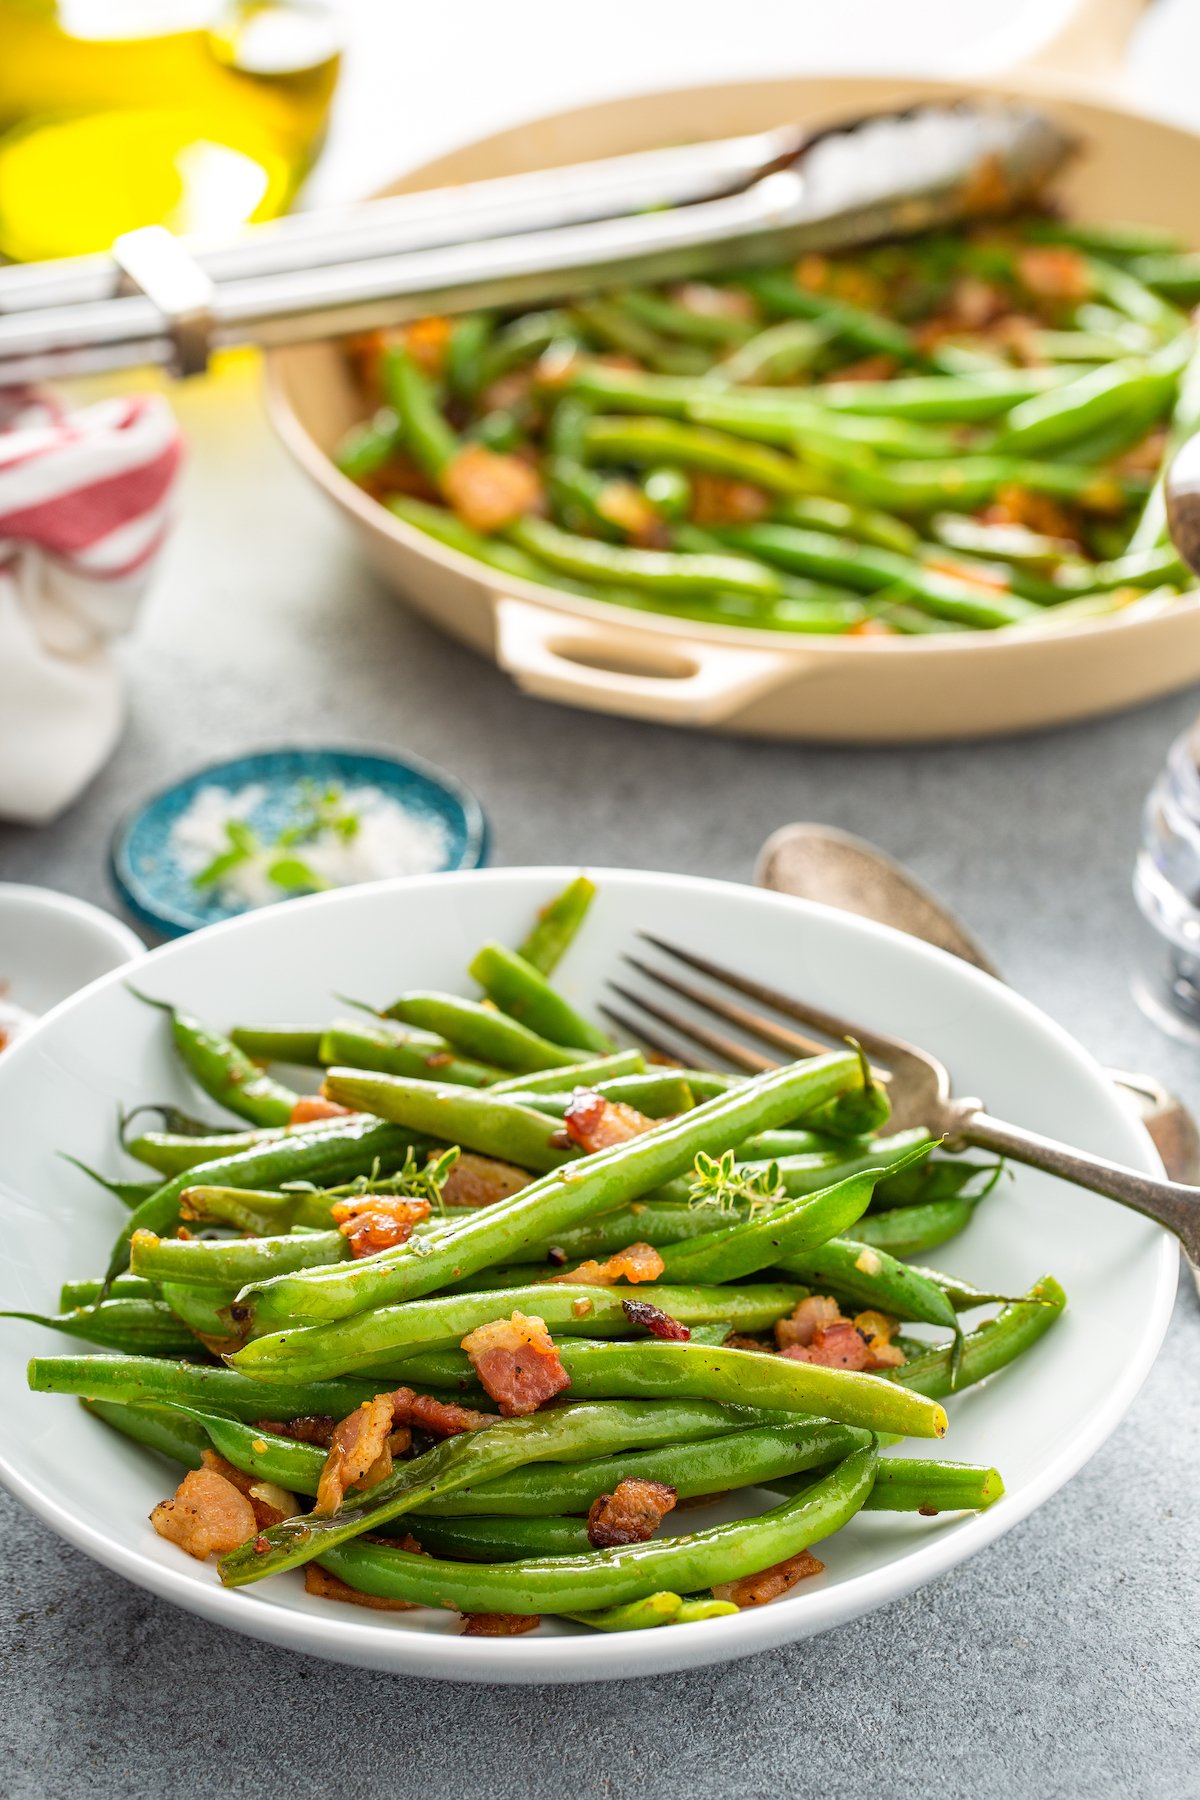 Plate of green beans with bacon bits.